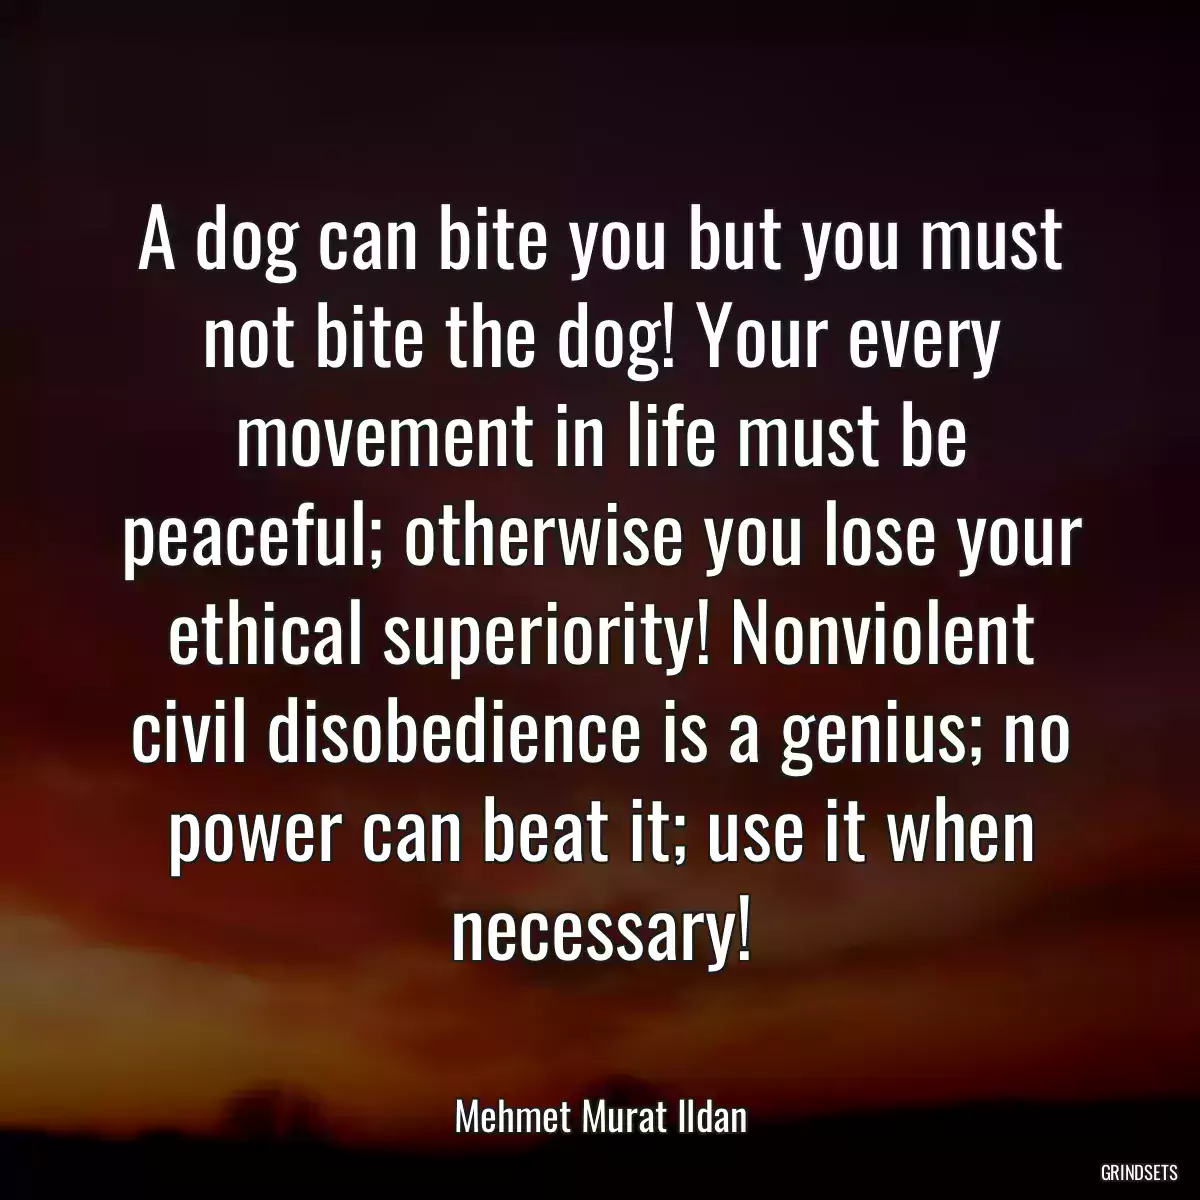 A dog can bite you but you must not bite the dog! Your every movement in life must be peaceful; otherwise you lose your ethical superiority! Nonviolent civil disobedience is a genius; no power can beat it; use it when necessary!